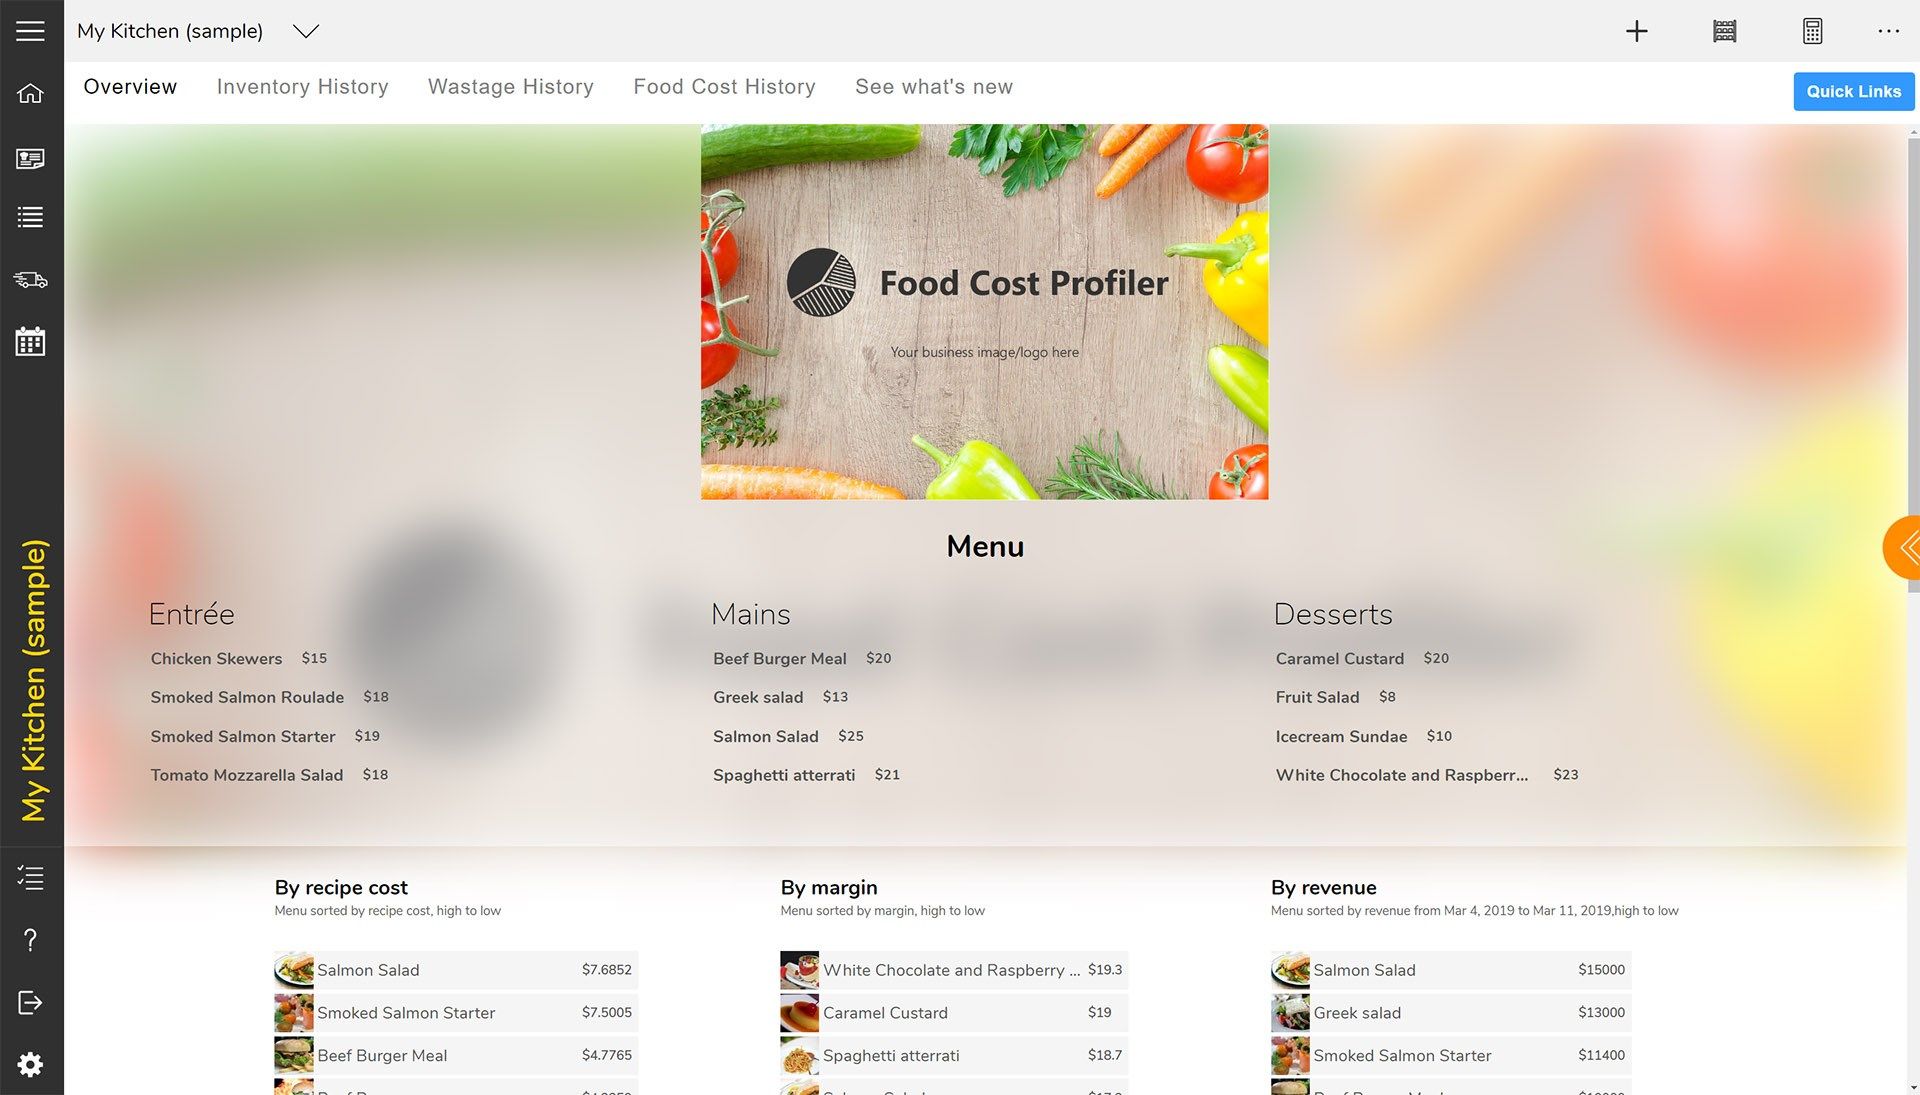 Dash page with menu and recipes sorted by cost, margin and revenue